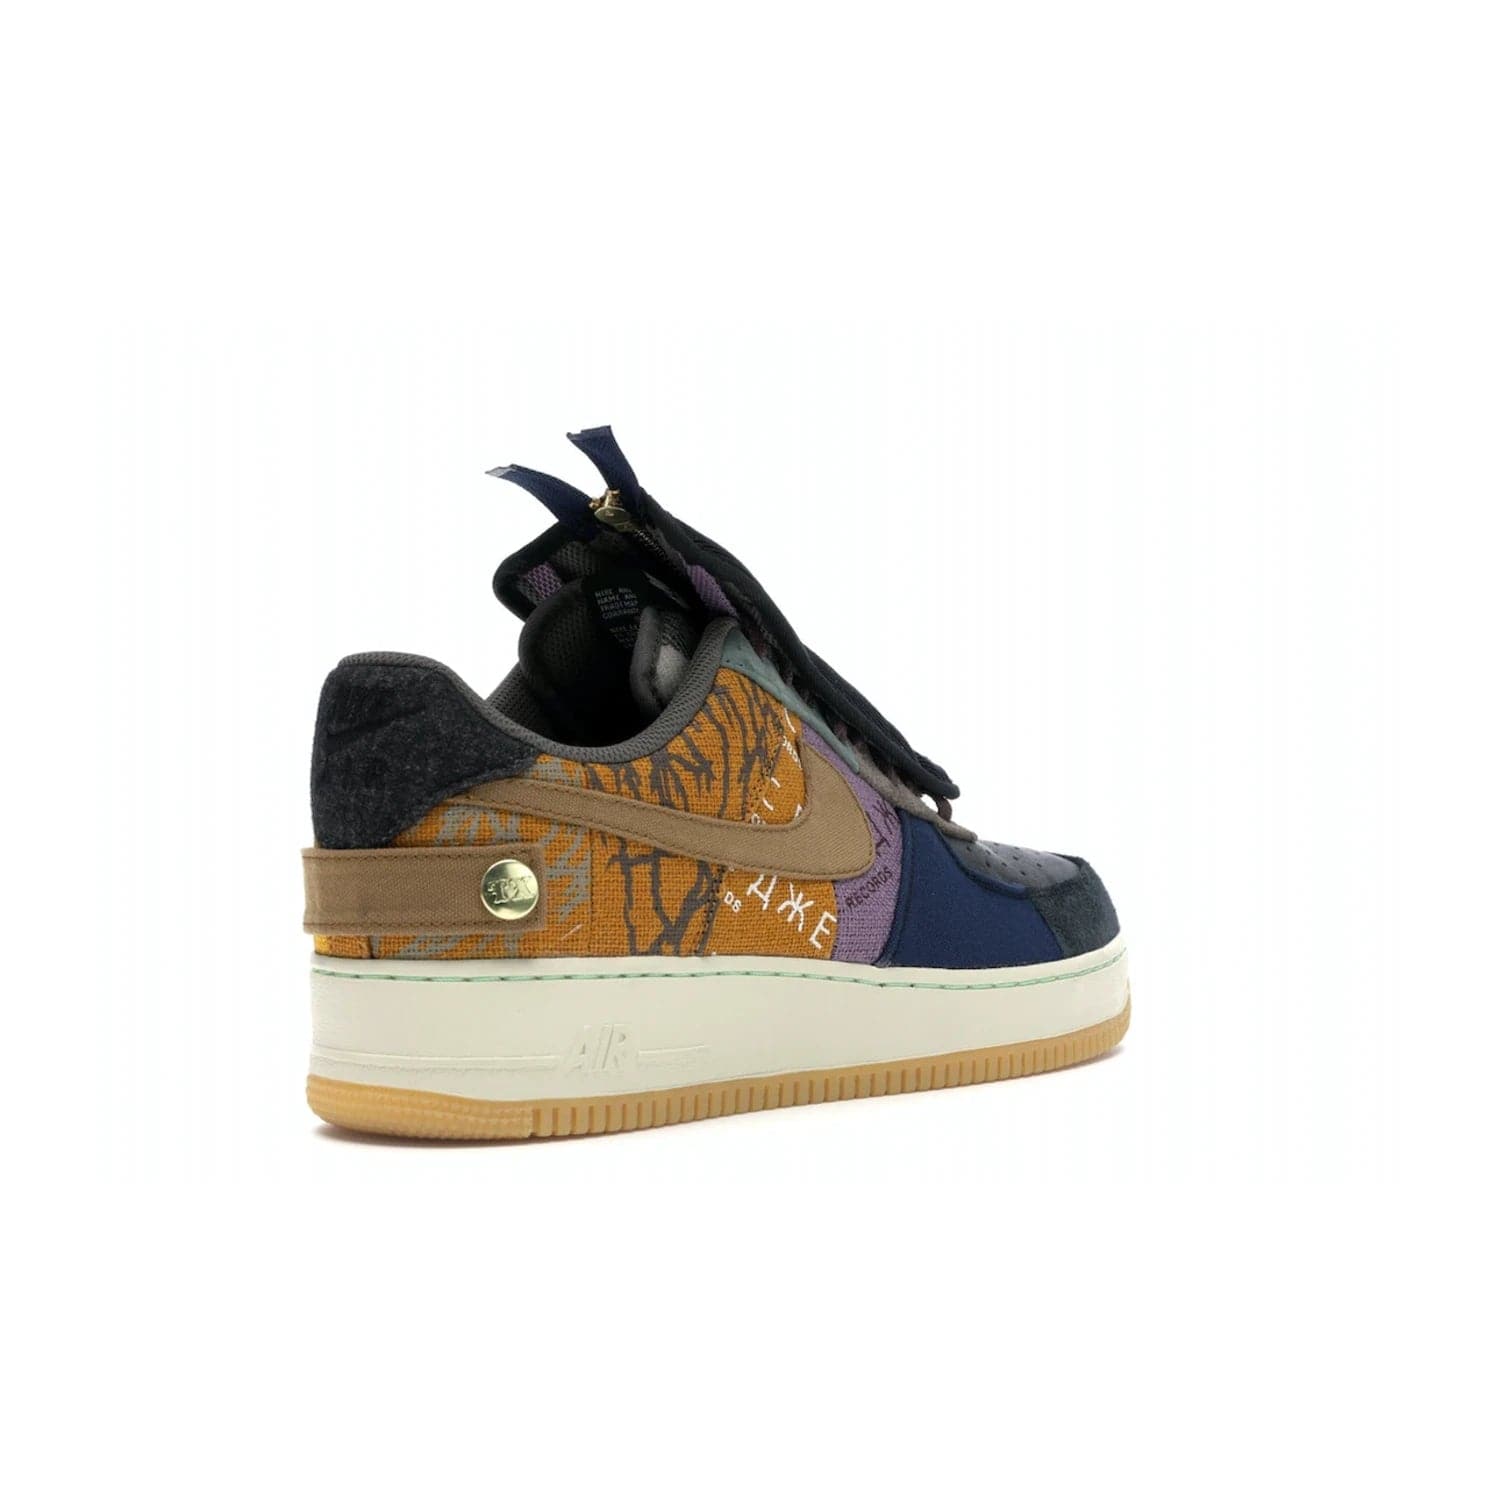 Nike Air Force 1 Low Travis Scott Cactus Jack - Image 32 - Only at www.BallersClubKickz.com - The Nike Air Force 1 Low Travis Scott Cactus Jack features a unique, multi-colored patchwork upper with muted bronze and fossil accents. Includes detachable lace cover, brass zipper, and Cactus Jack insignias. A sail midsole, gum rubber outsole complete the eye-catching design. Perfect for comfort and style with unexpected touches of detail.